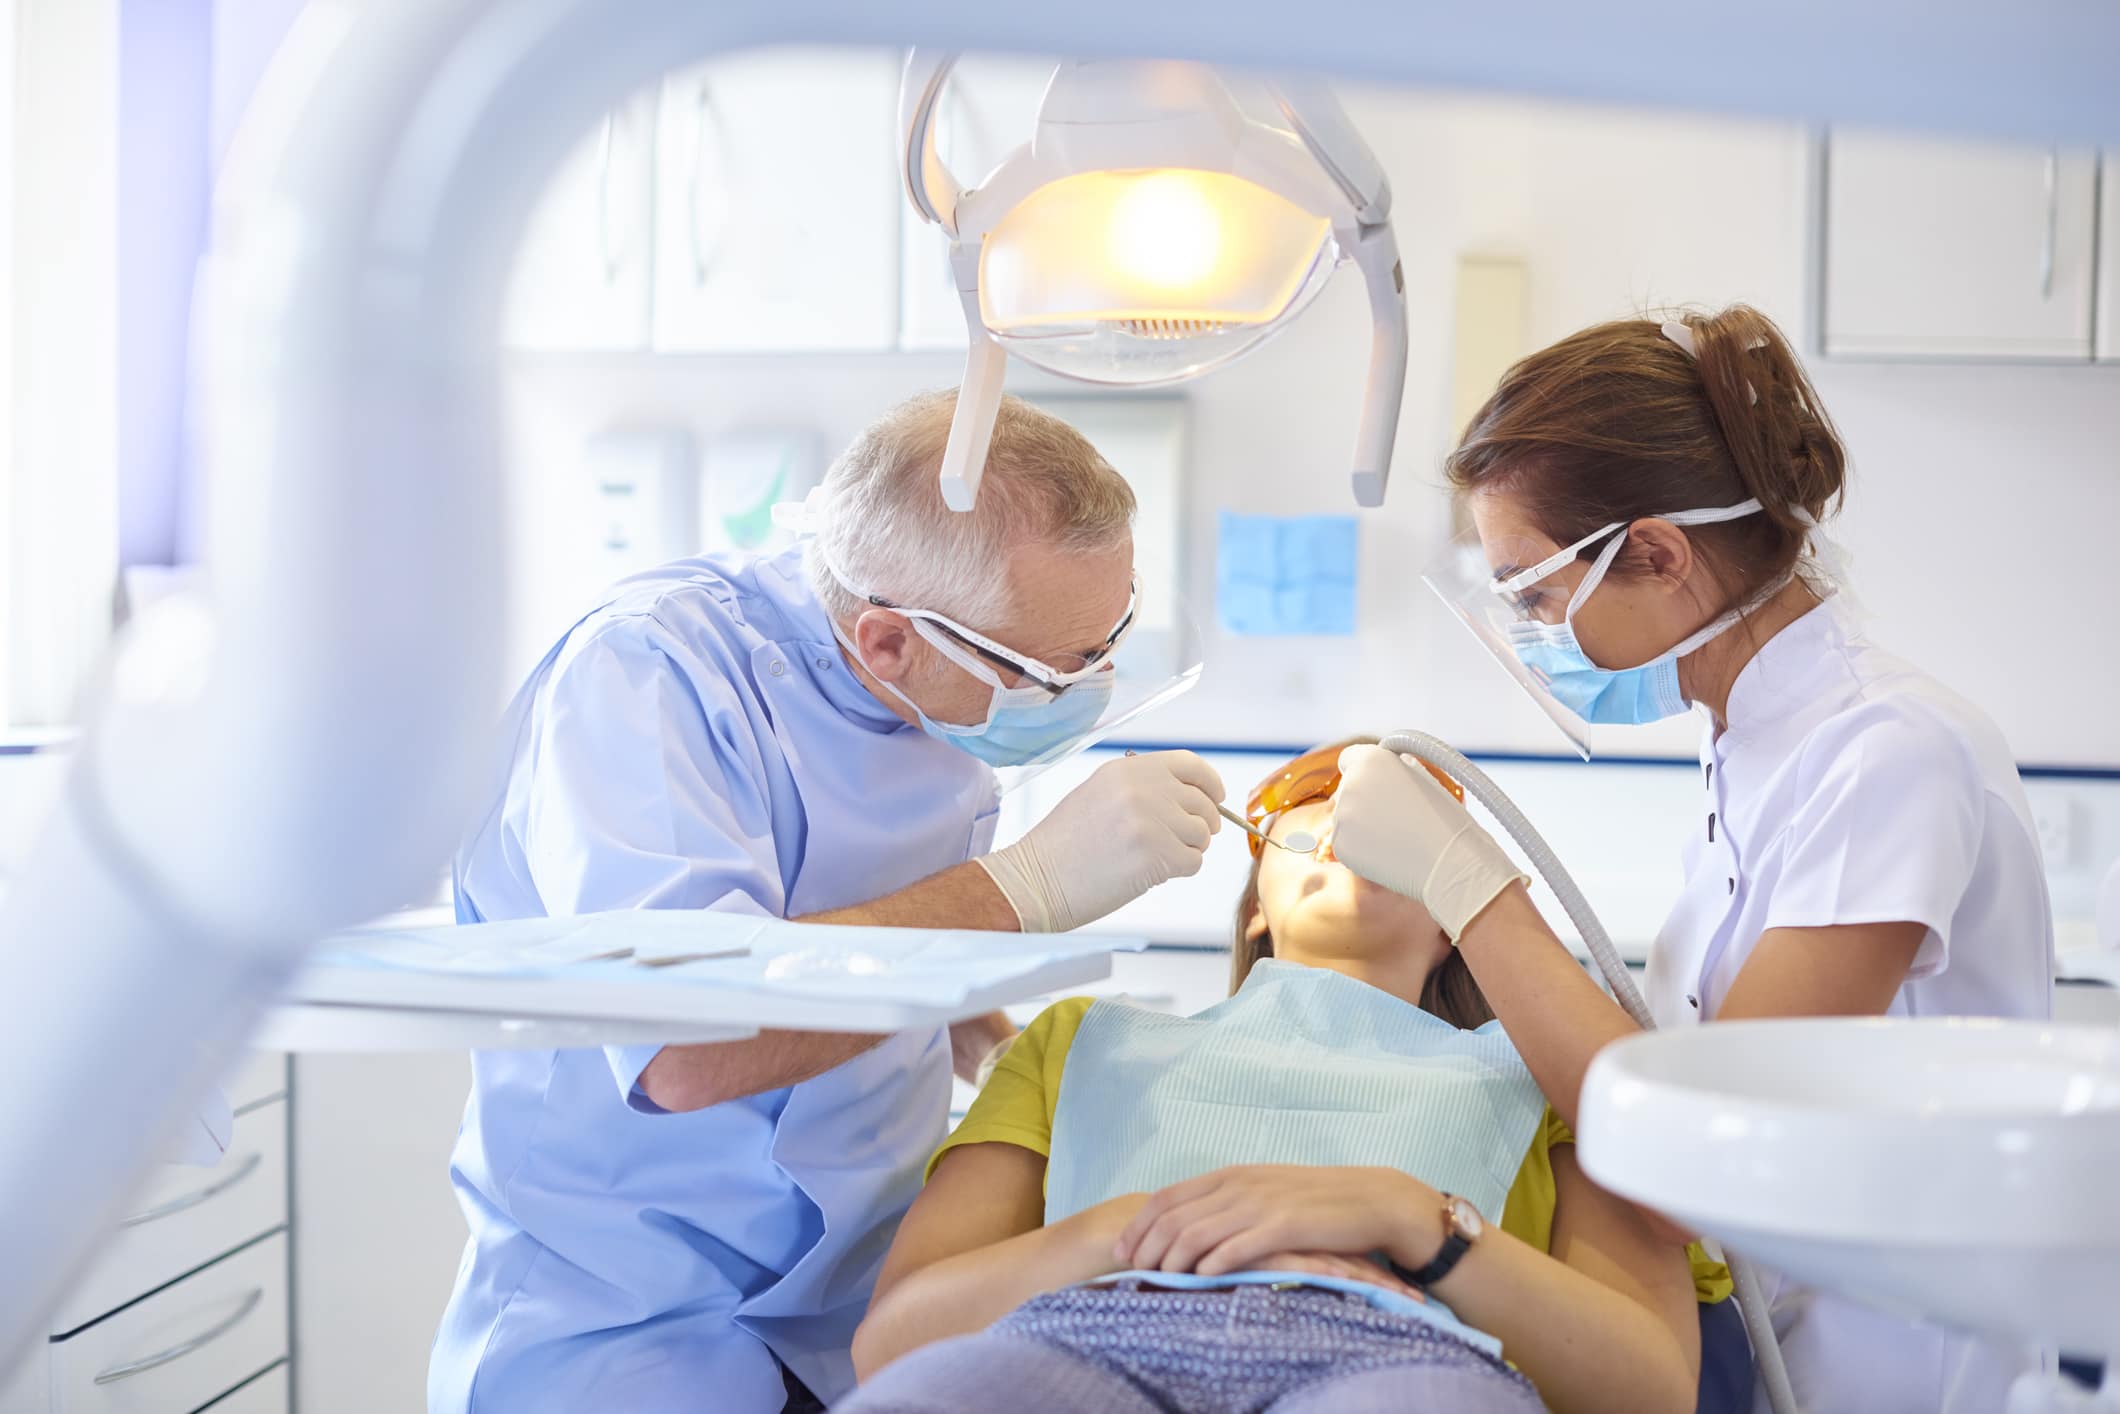 emergency dental services can save your smile